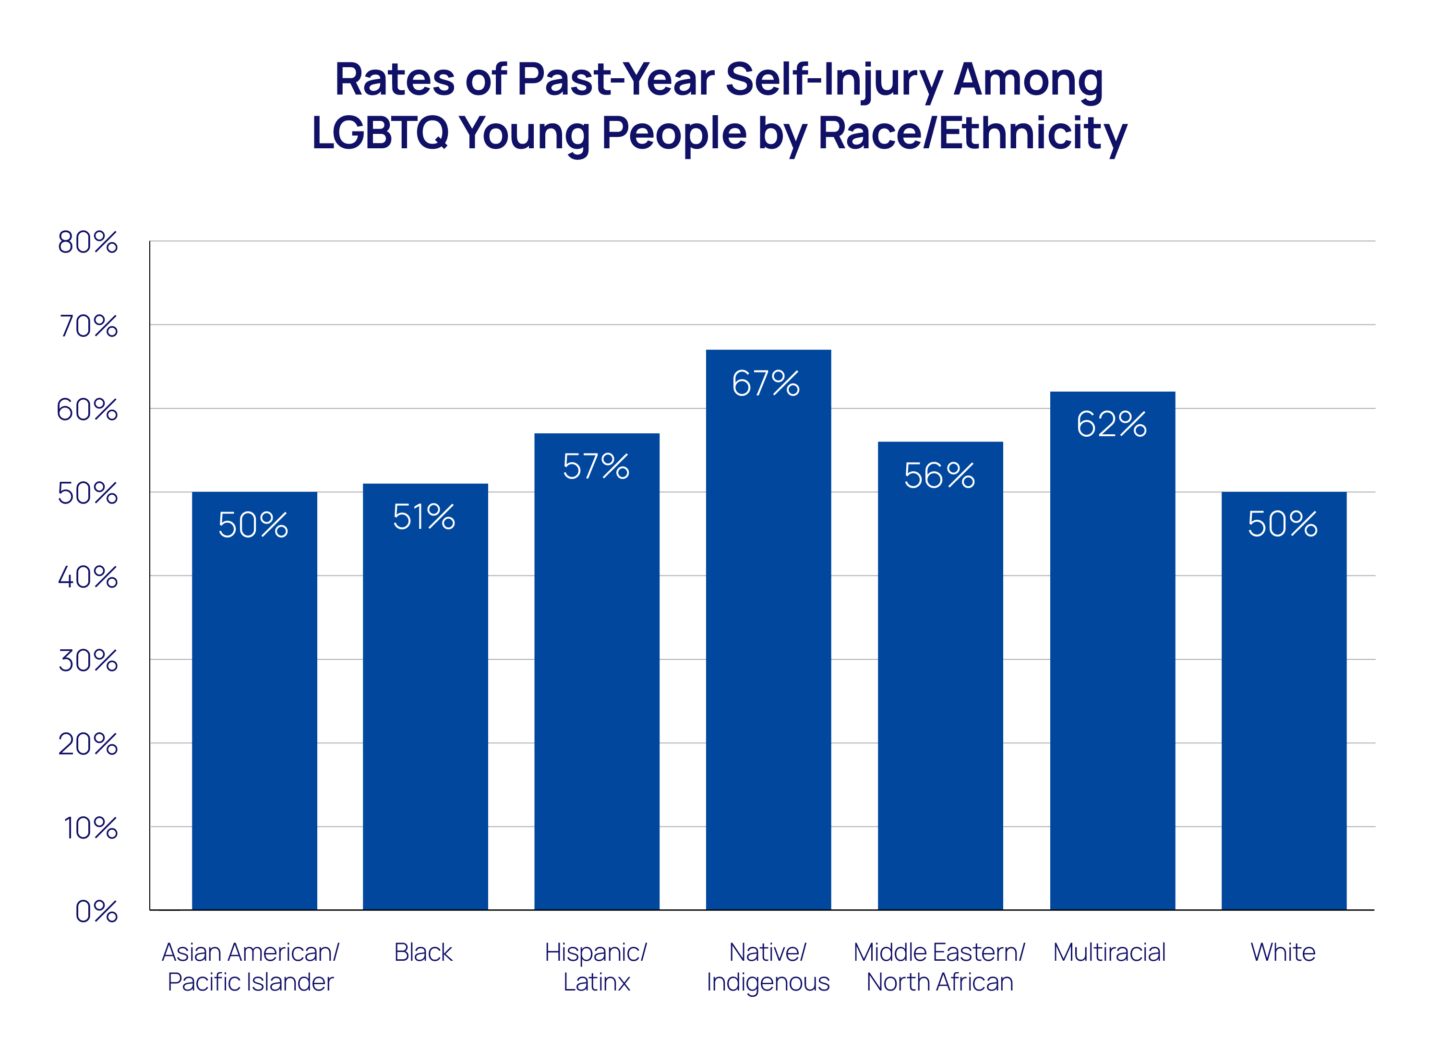 A bar graph showing the rates of past-year self-injury among LGBTQ young people by race/ethnicity: Asian American/Pacific Islander at 50%, Black at 51%, Hispanic/Latinx at 57%, Native/Indigenous at 67%, Middle Eastern/North African at 56%, Multiracial at 62%, and White at 50%.